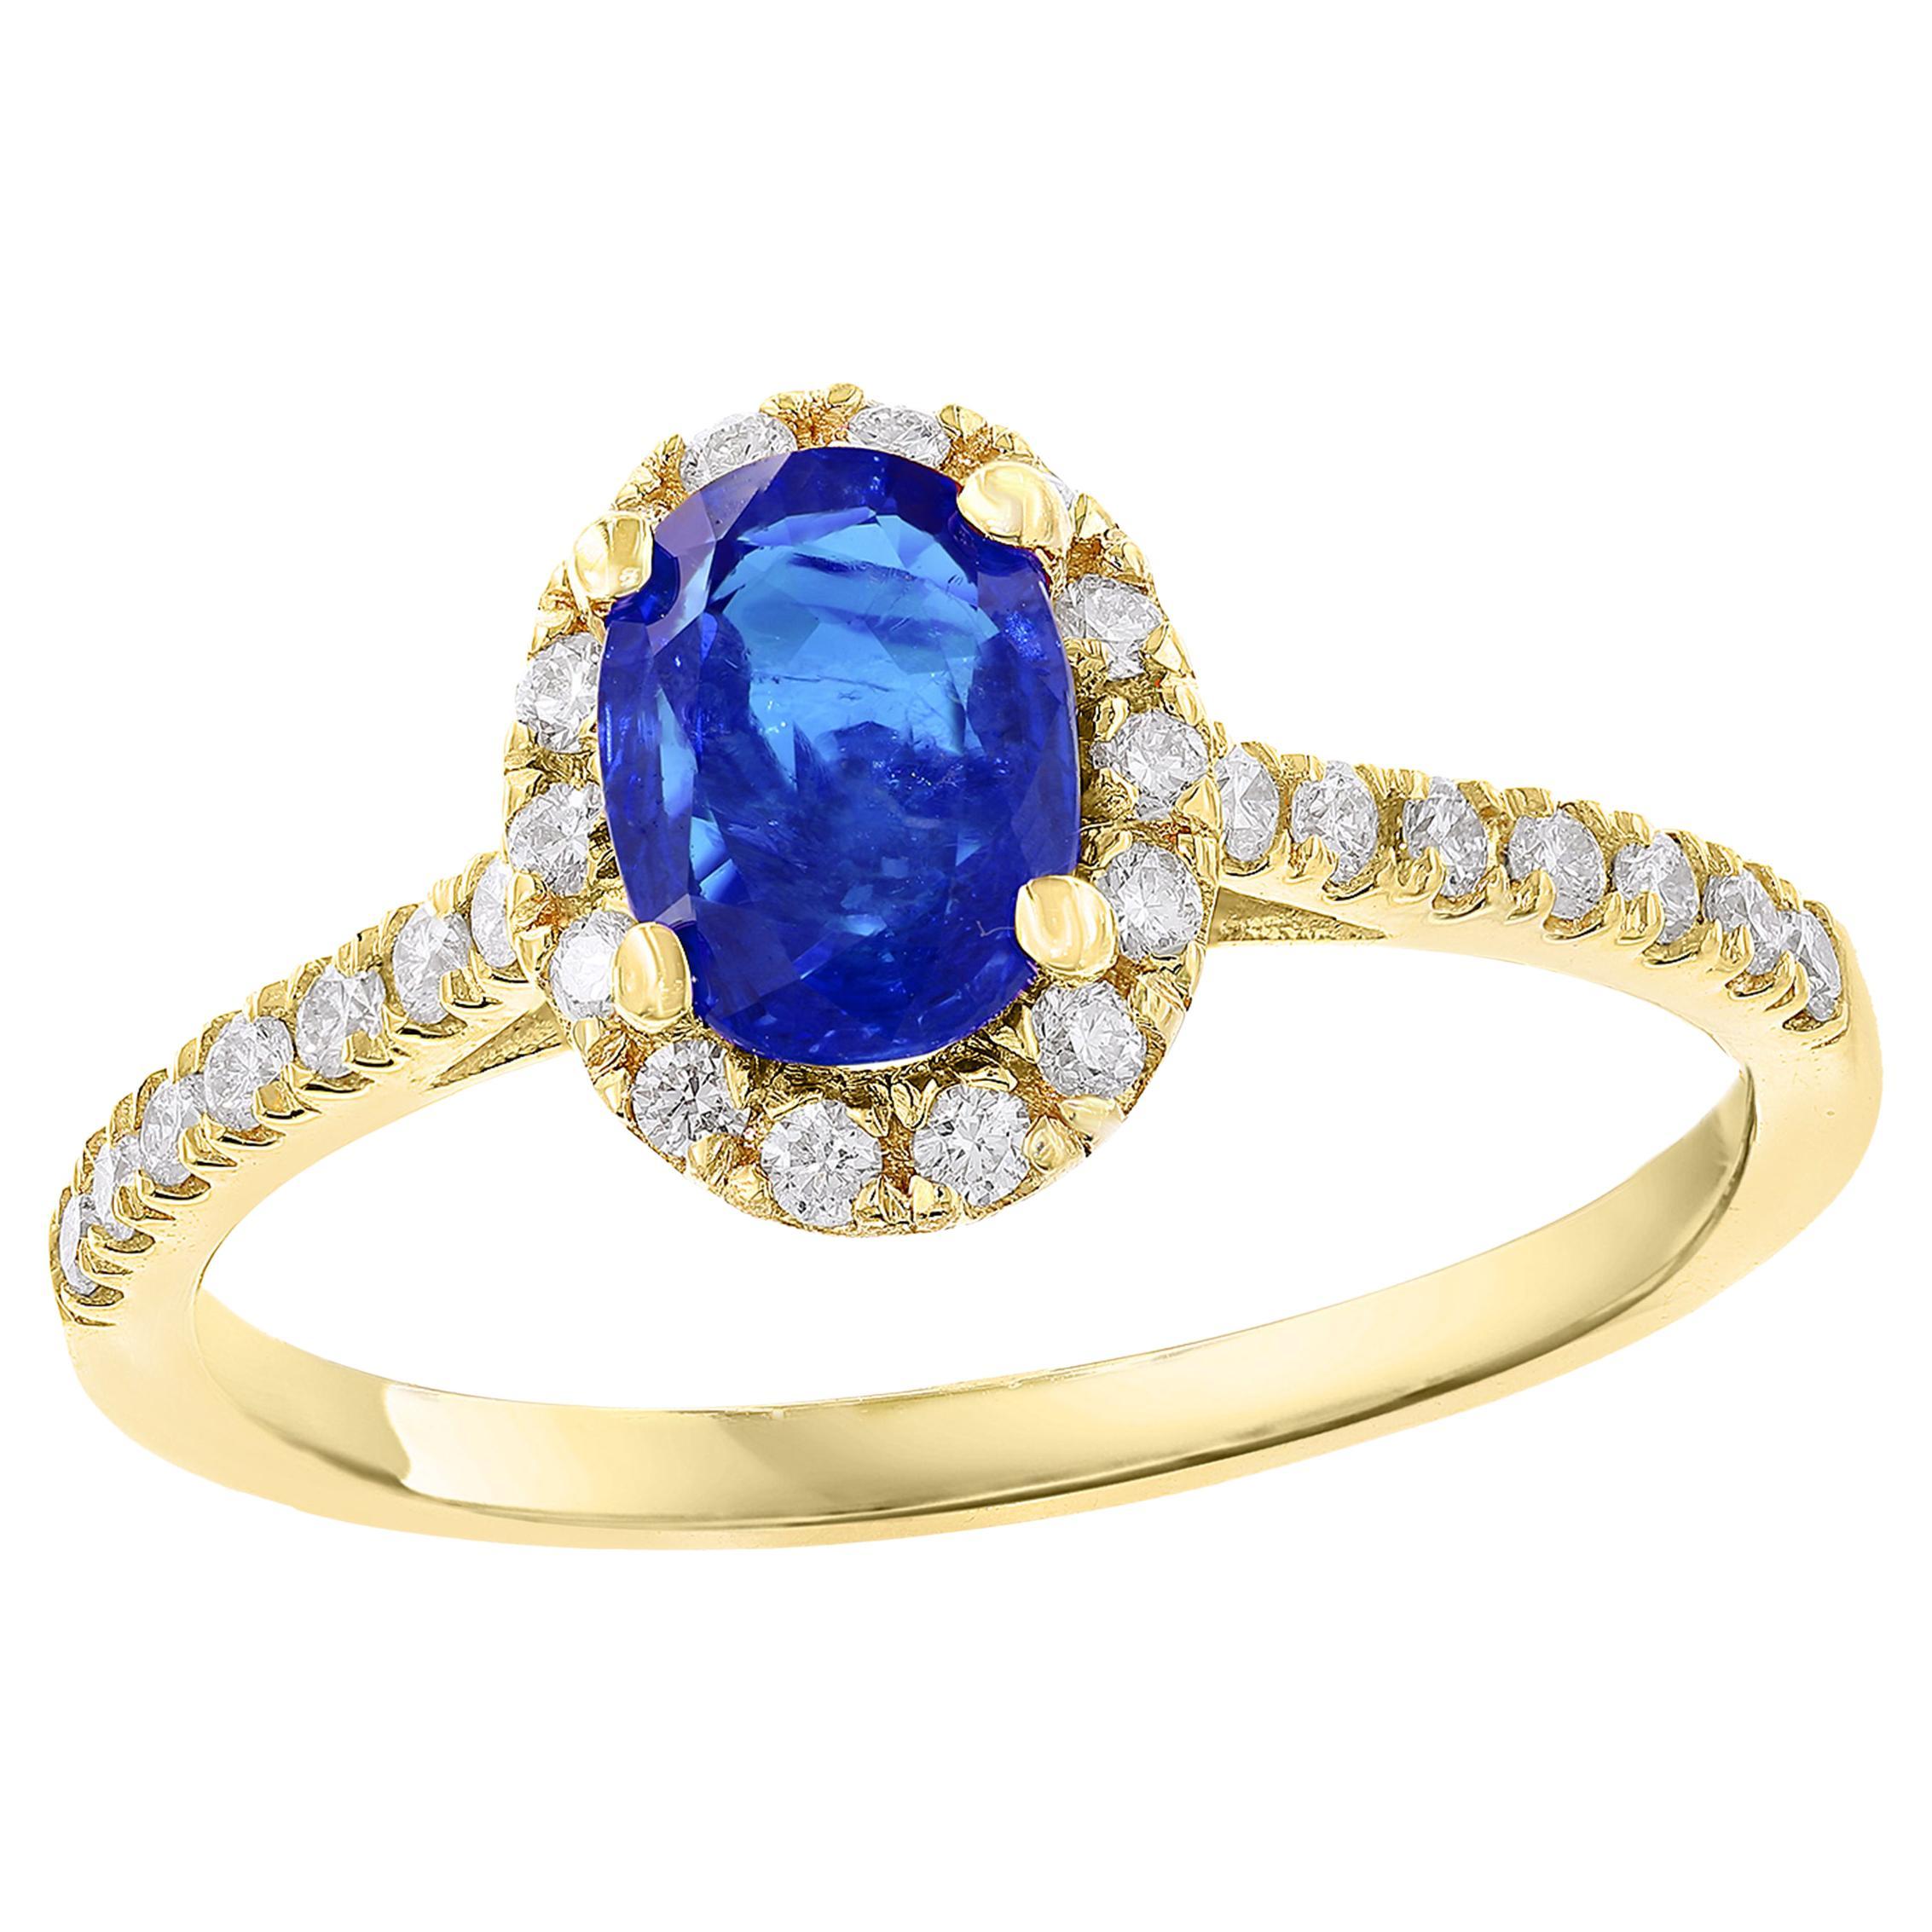 1.24 Carat Oval Sapphire and Diamond Halo Engagement Ring in 18K Yellow Gold